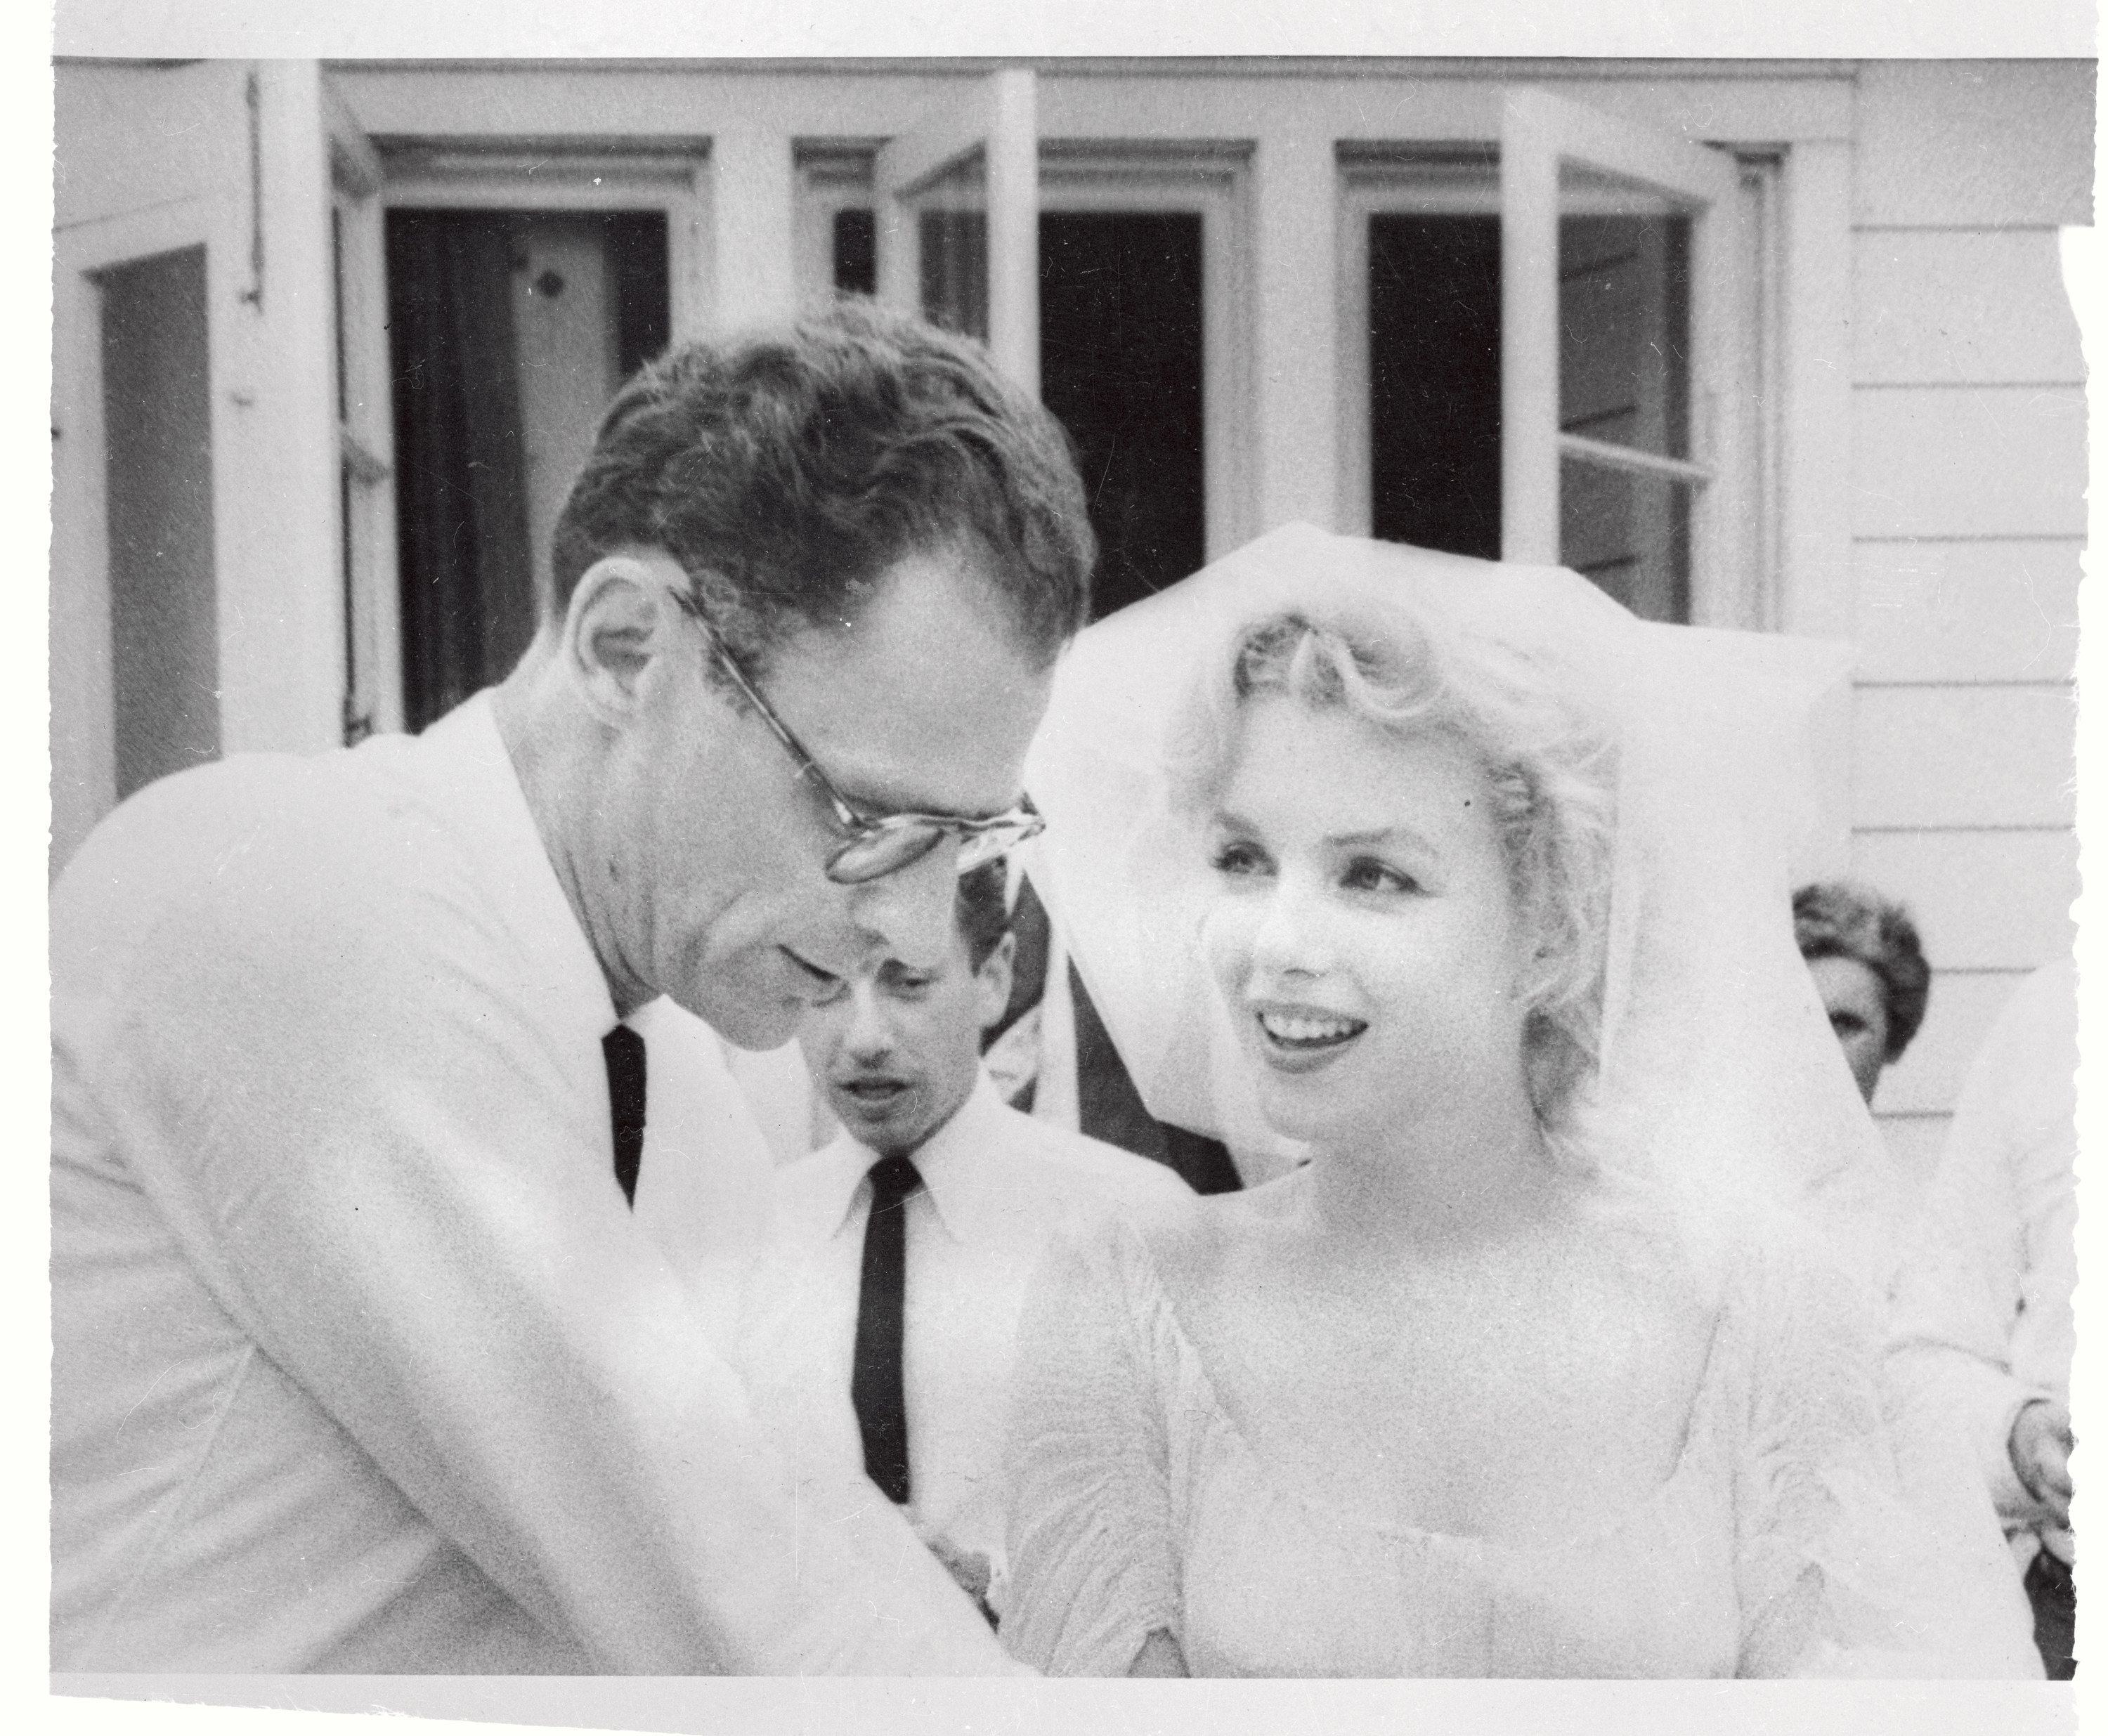 Arthur Miller and Marilyn Monroe stand outside together after their wedding ceremony